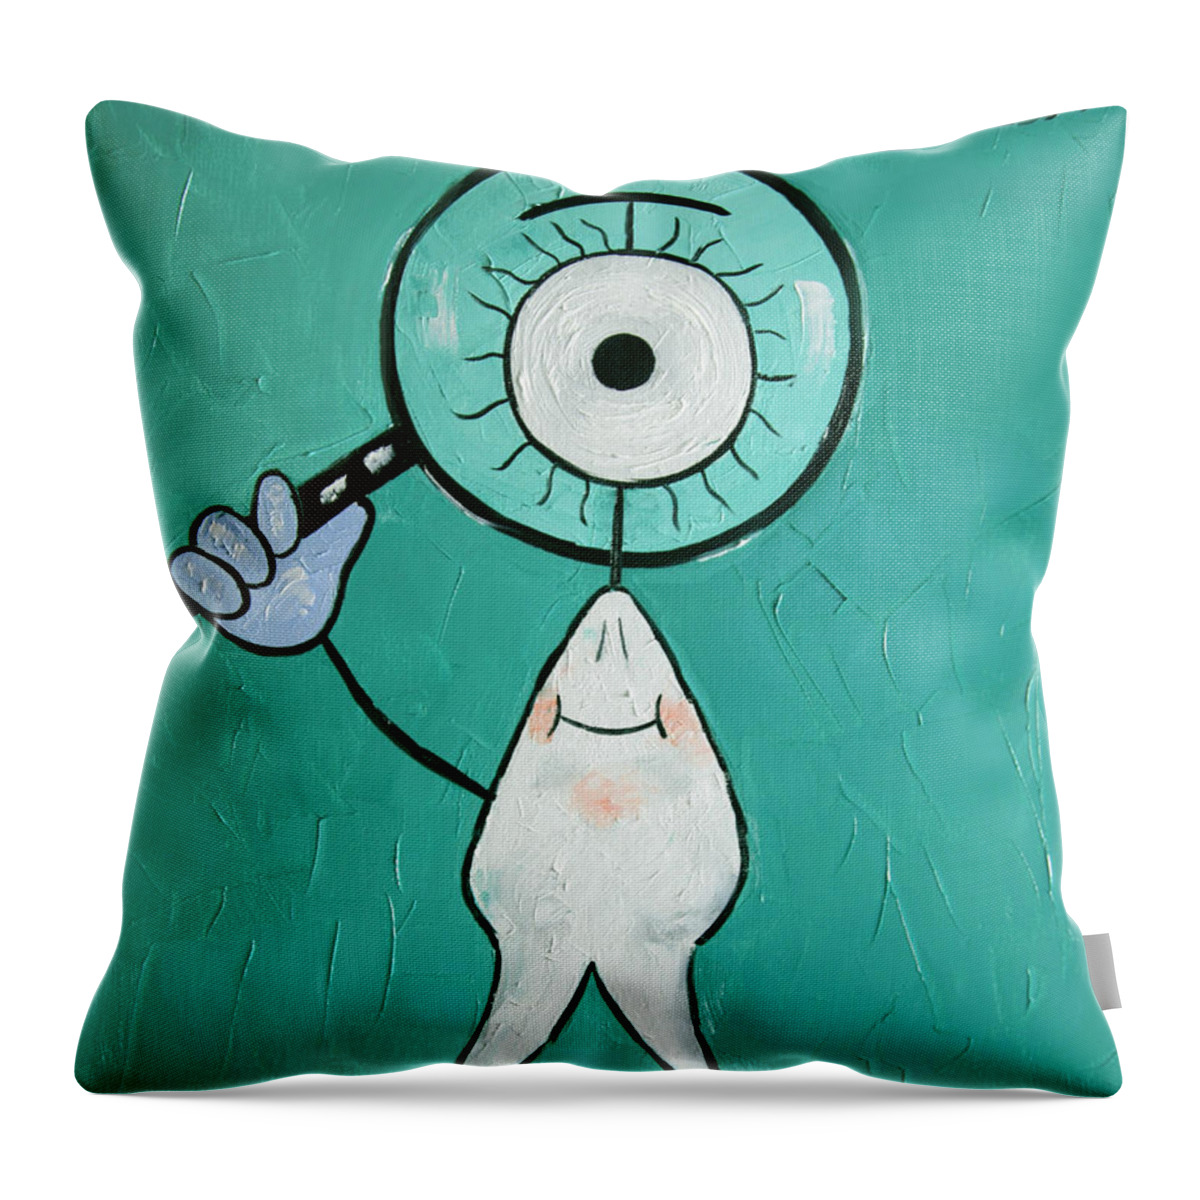 Eye Tooth Throw Pillow featuring the painting Eye Tooth by Anthony Falbo